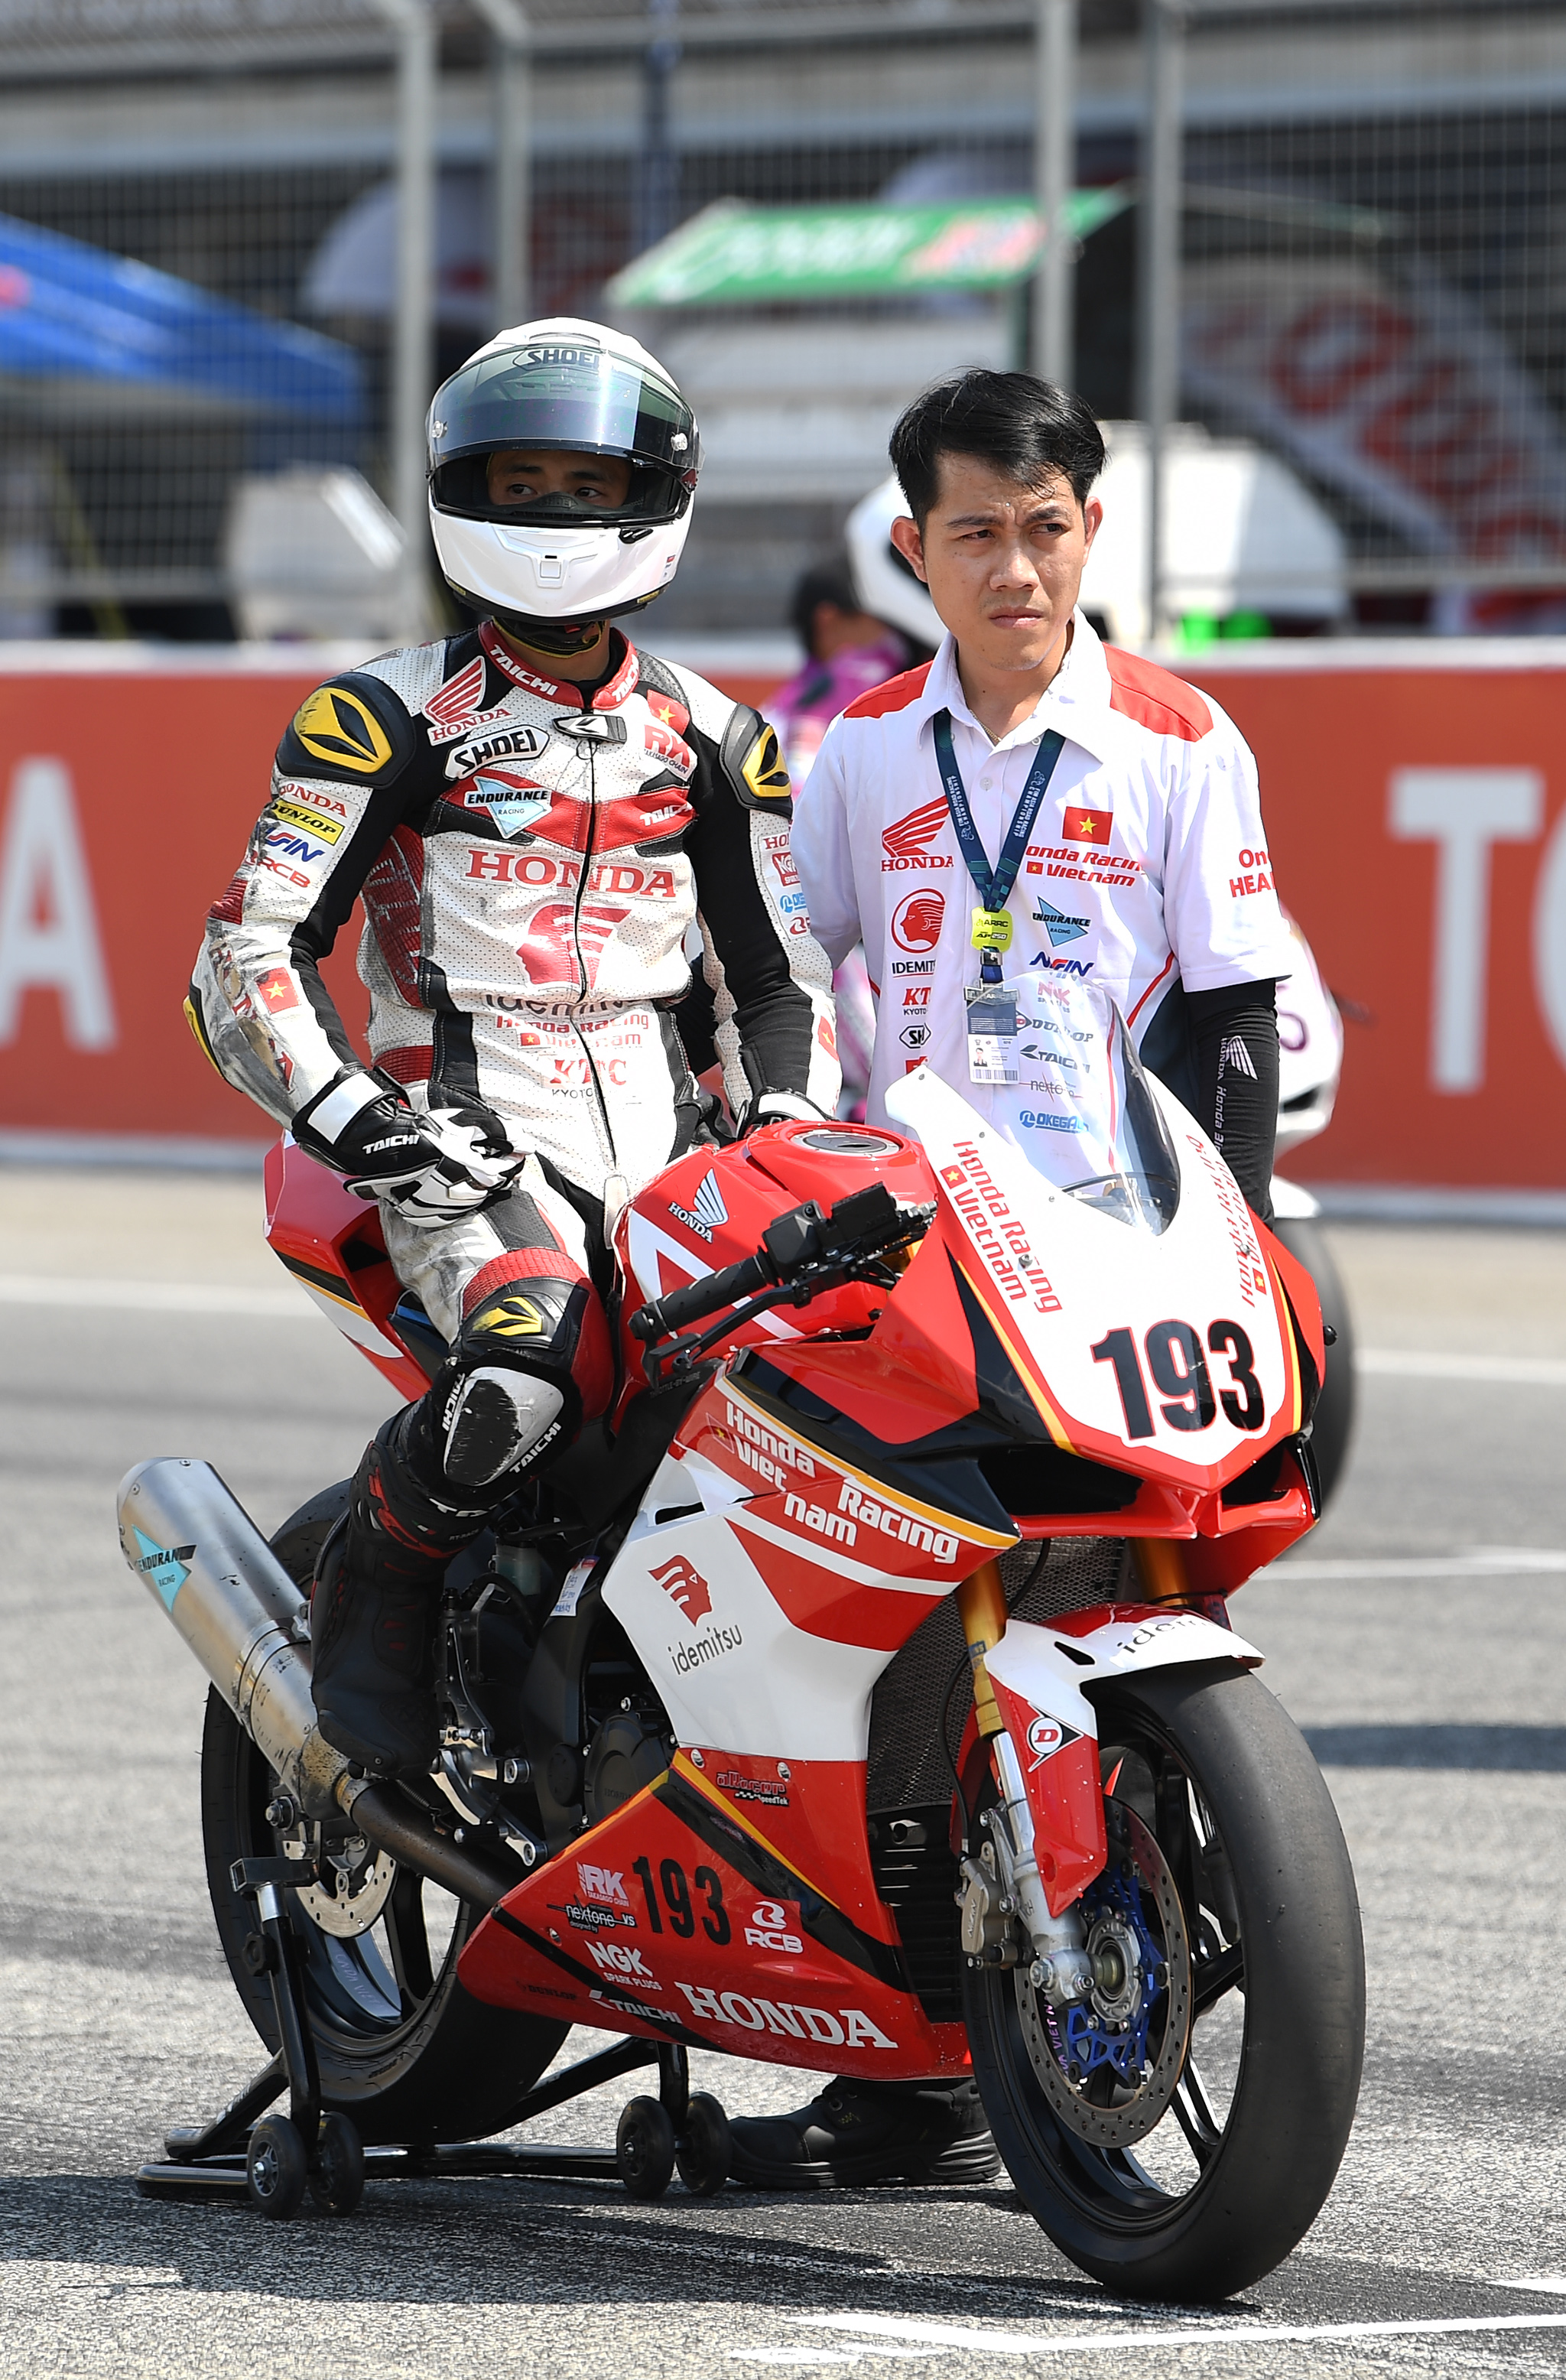 Honda Racing Vietnam ready to fight in Stage 2 ARRC 2023 Race 2 Results Stage 1 ARRC 2023 - Cao Viet Nam achieved the highest ranking in his career nhh-9011.jpg